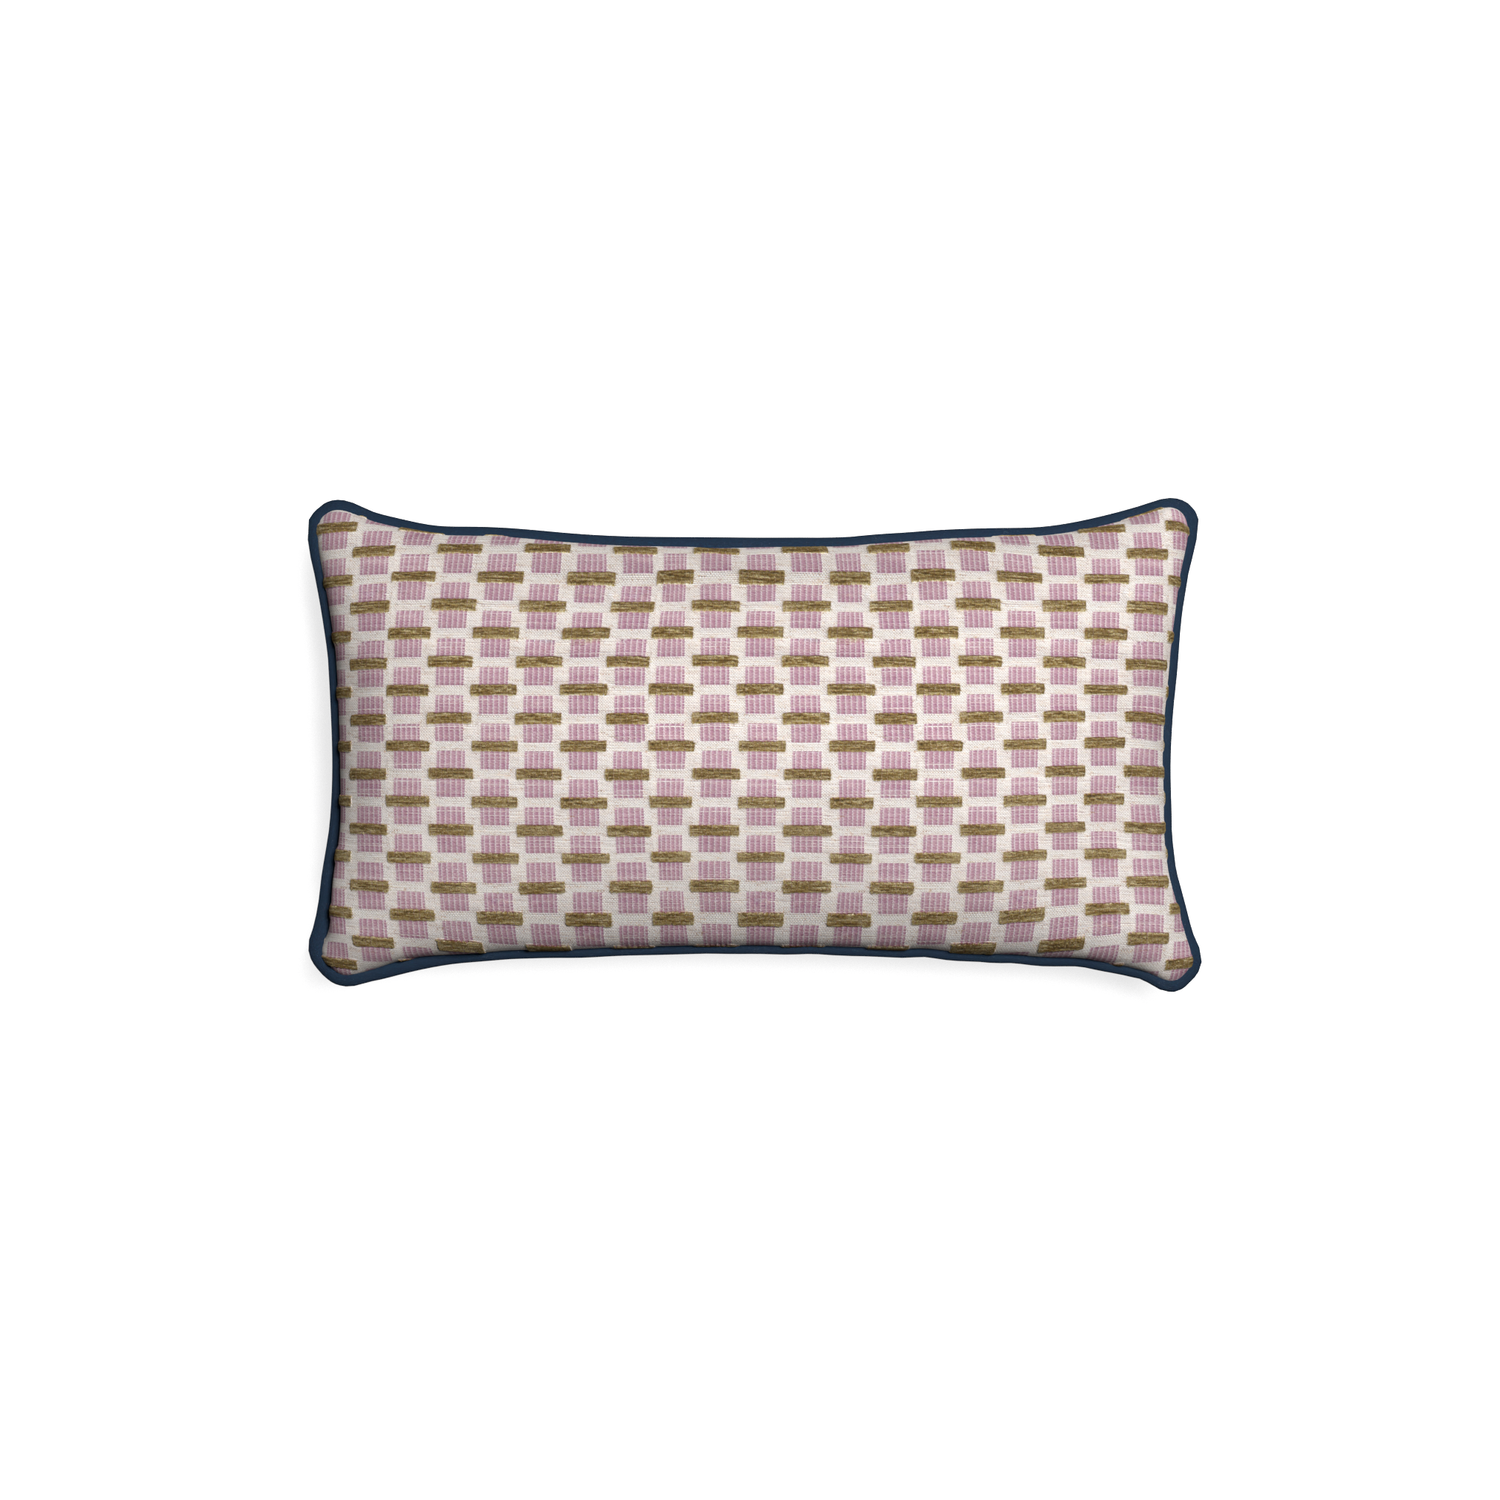 Petite-lumbar willow orchid custom pink geometric chenillepillow with c piping on white background